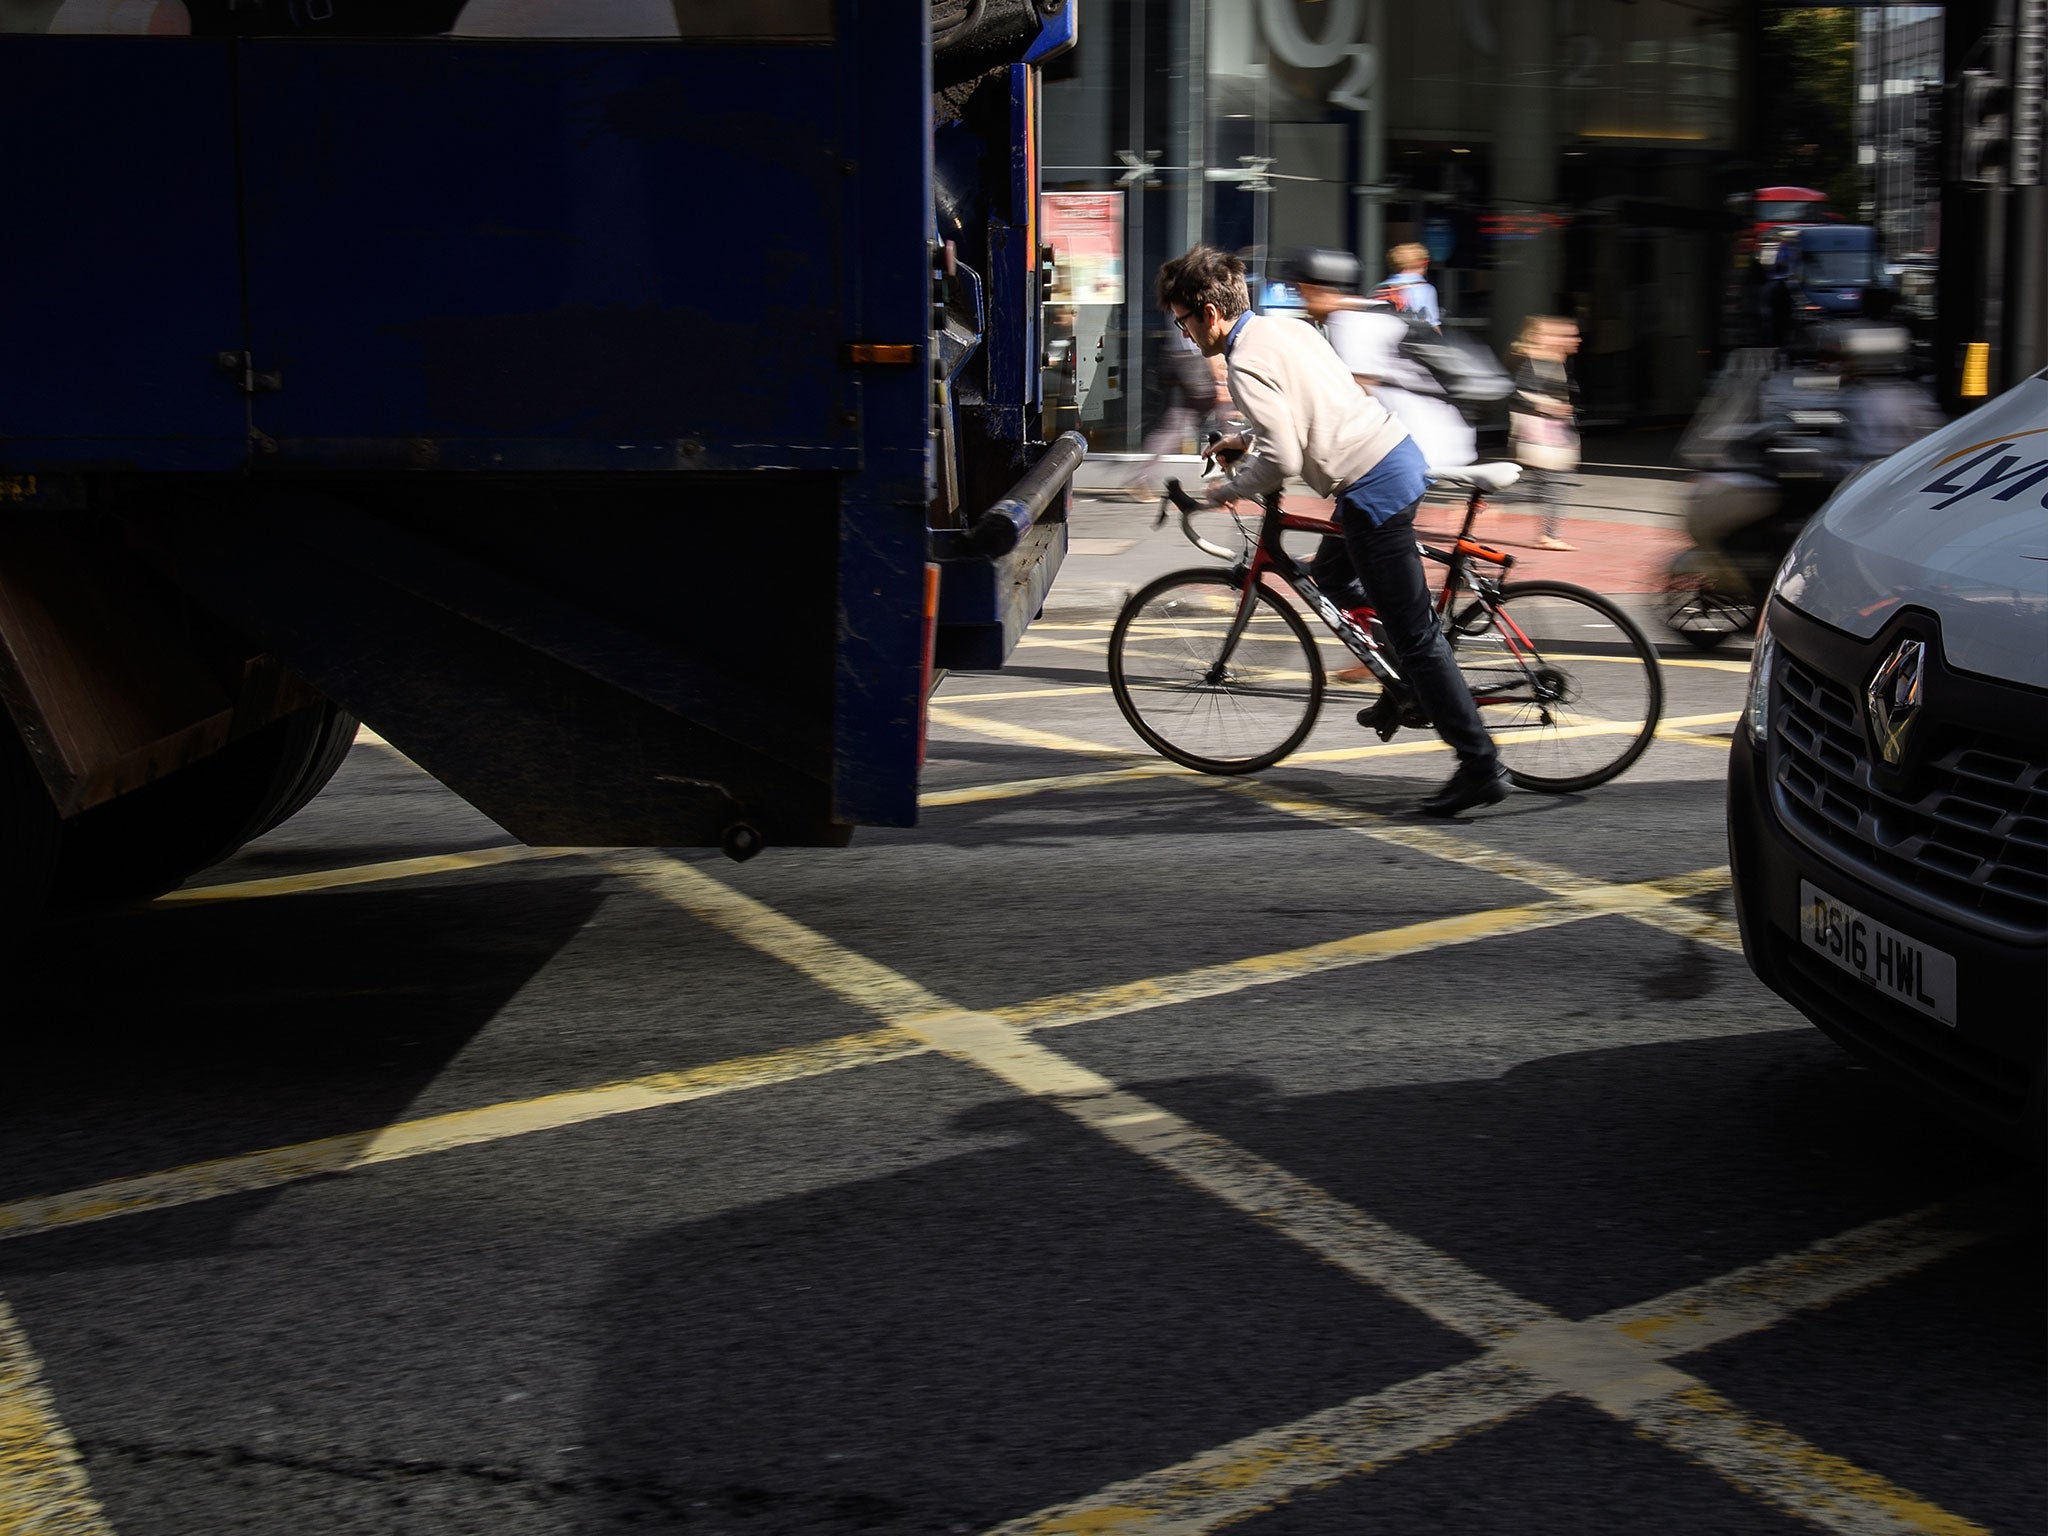 A cyclist negotiates the busy streets of the capital